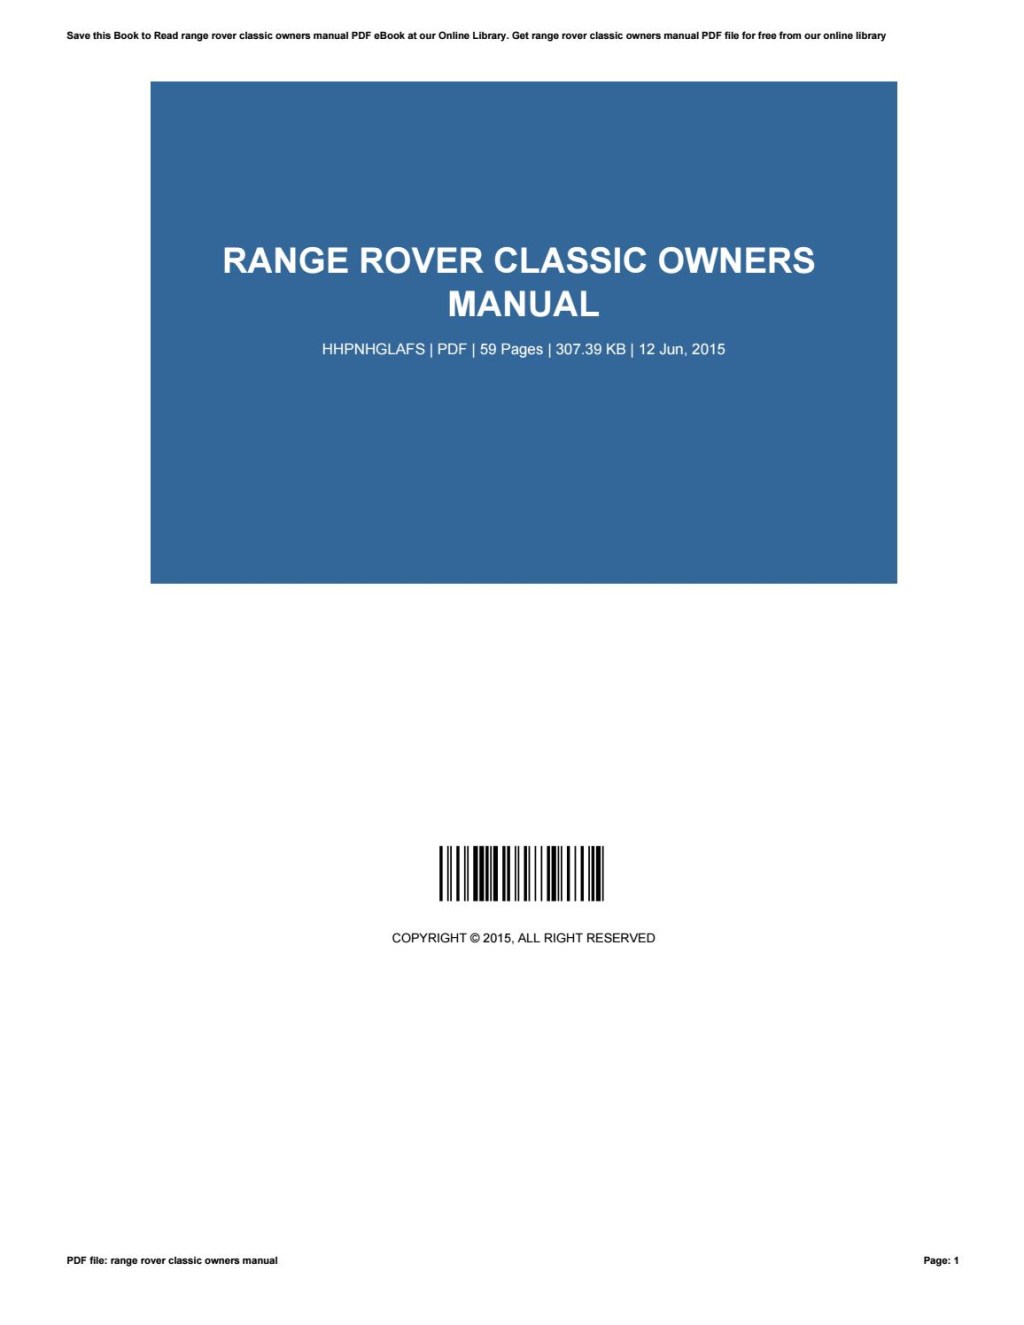 Picture of: Range rover classic owners manual by GastonHernandez – Issuu